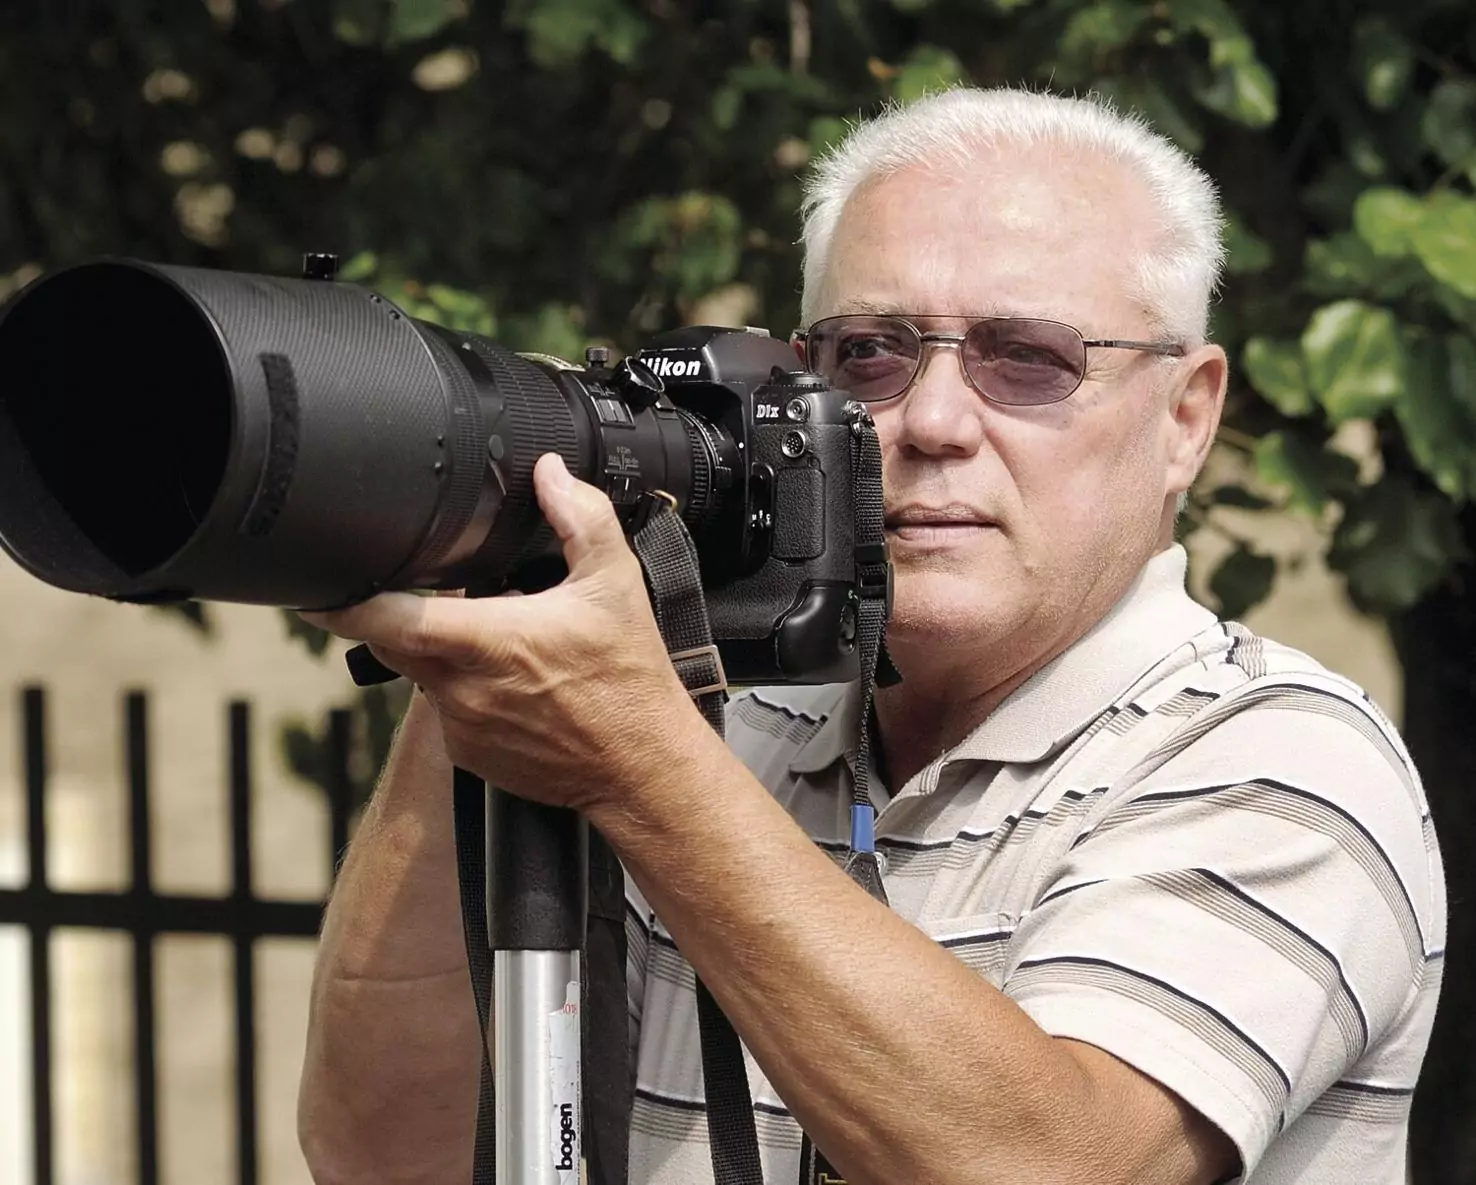 COMPANY NEWS: Award-winning photographer retires after five decades